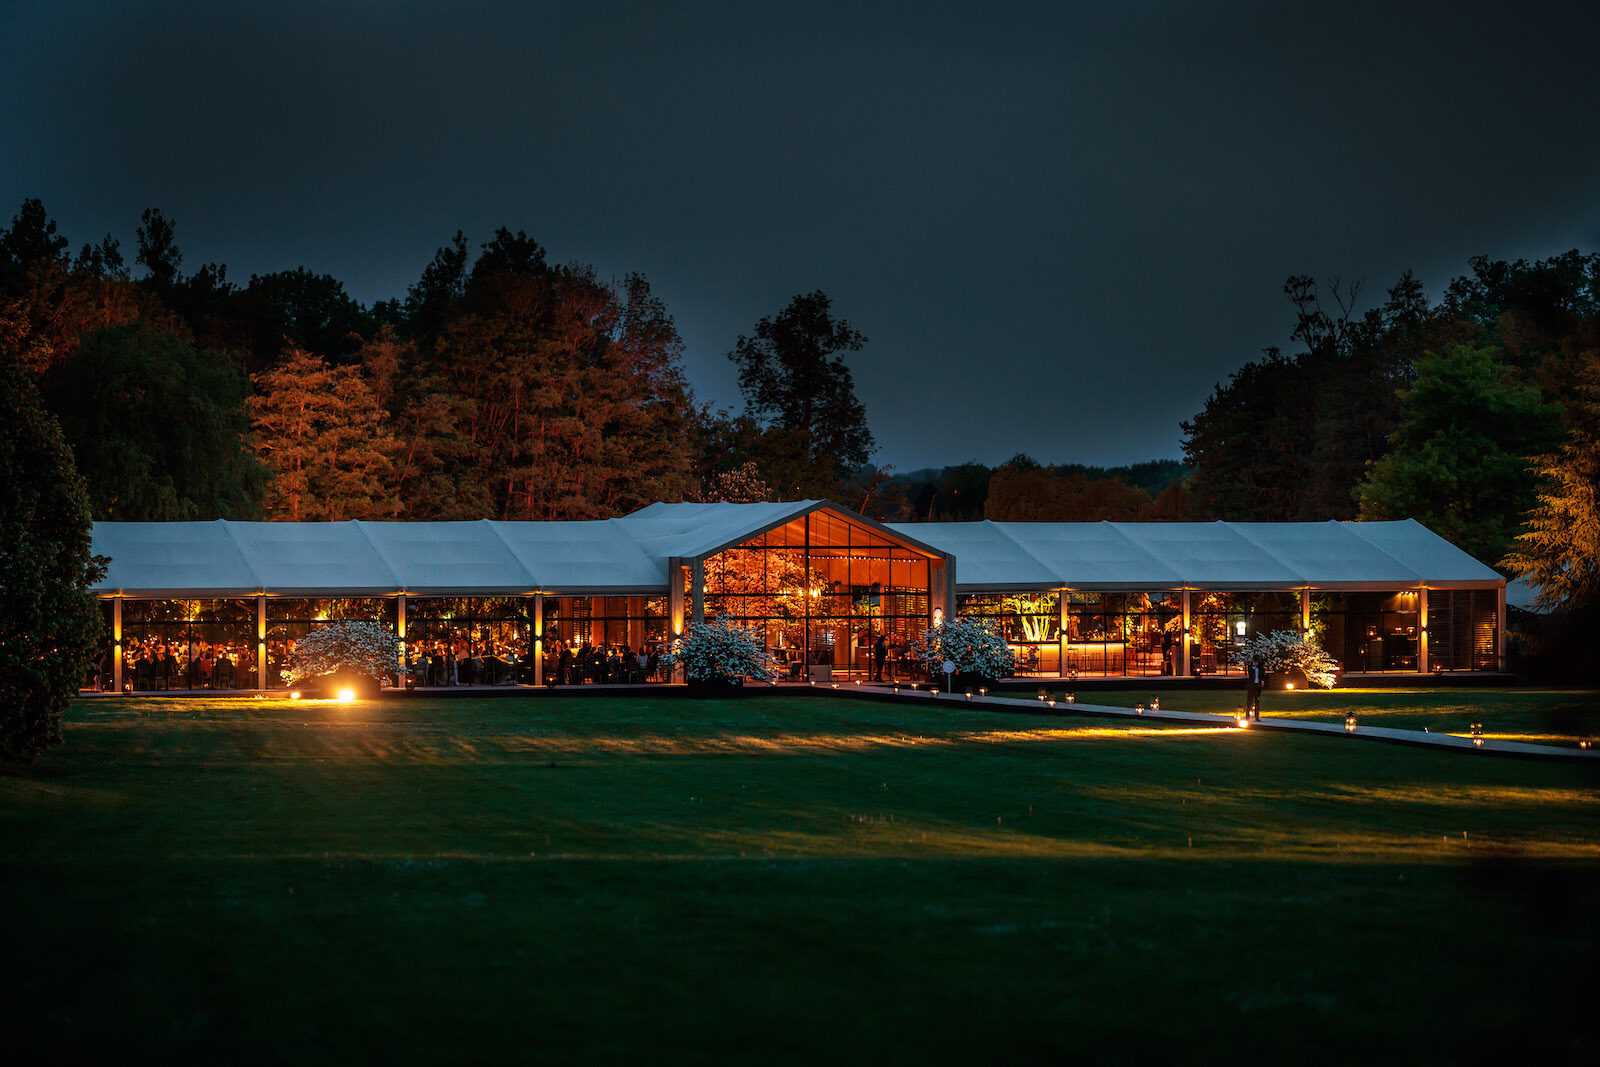 Across the entire width of the tent, guests had a view of the beautiful garden.